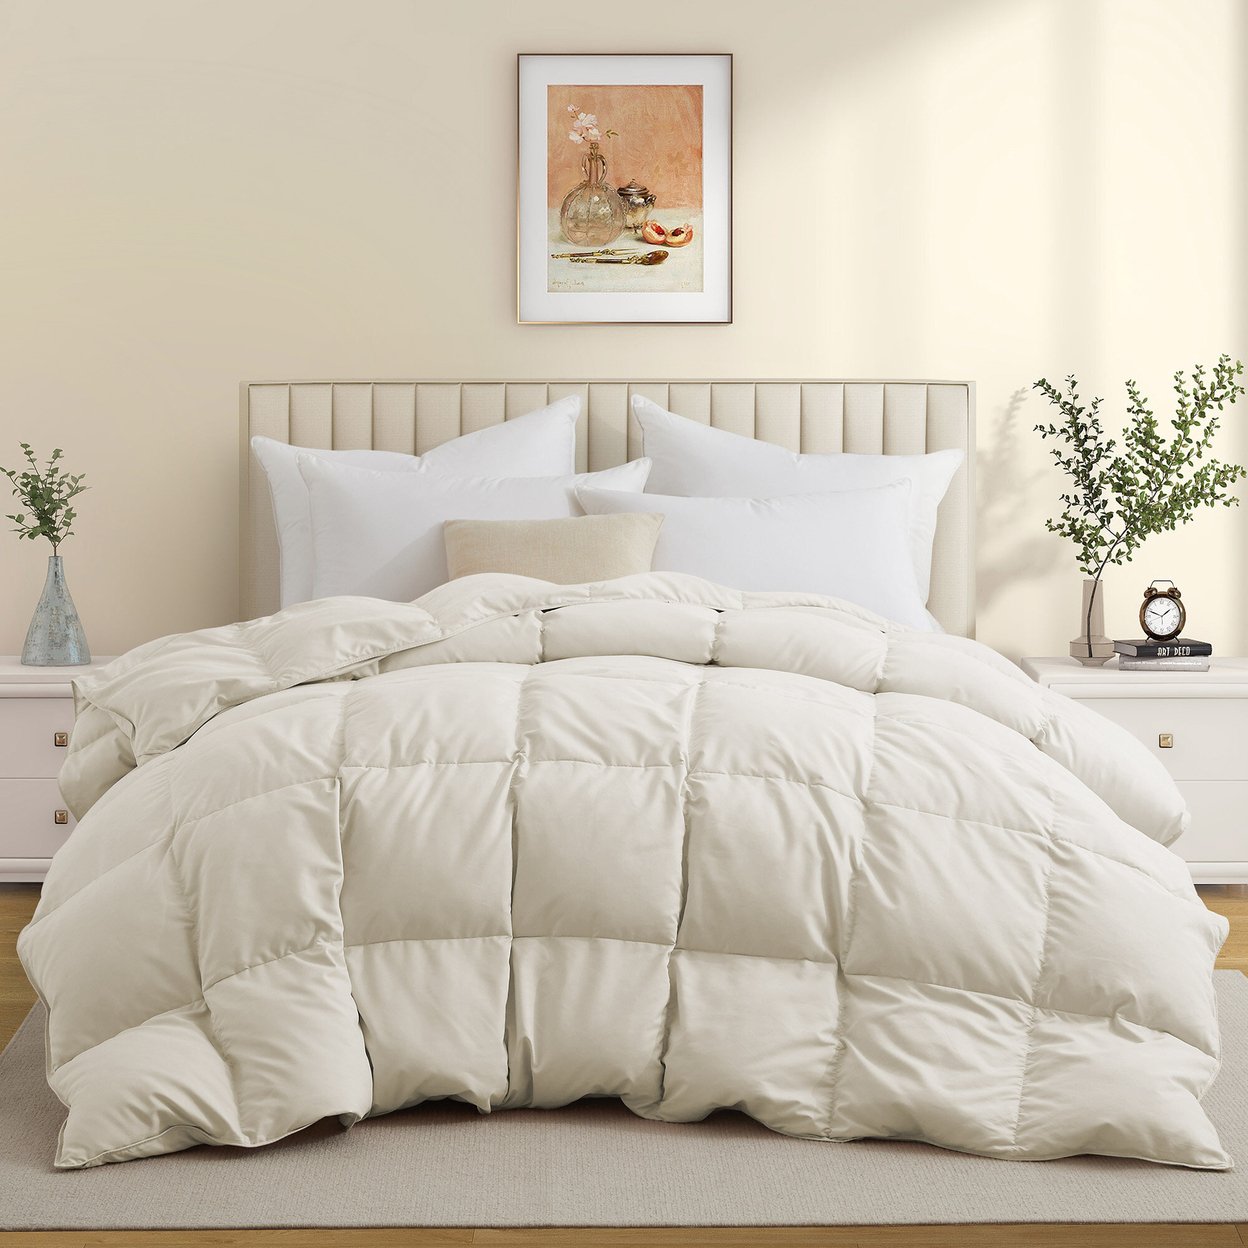 Premium All Seasons White Goose Feather Fiber And Down Comforter - Butter Cream, Cal King